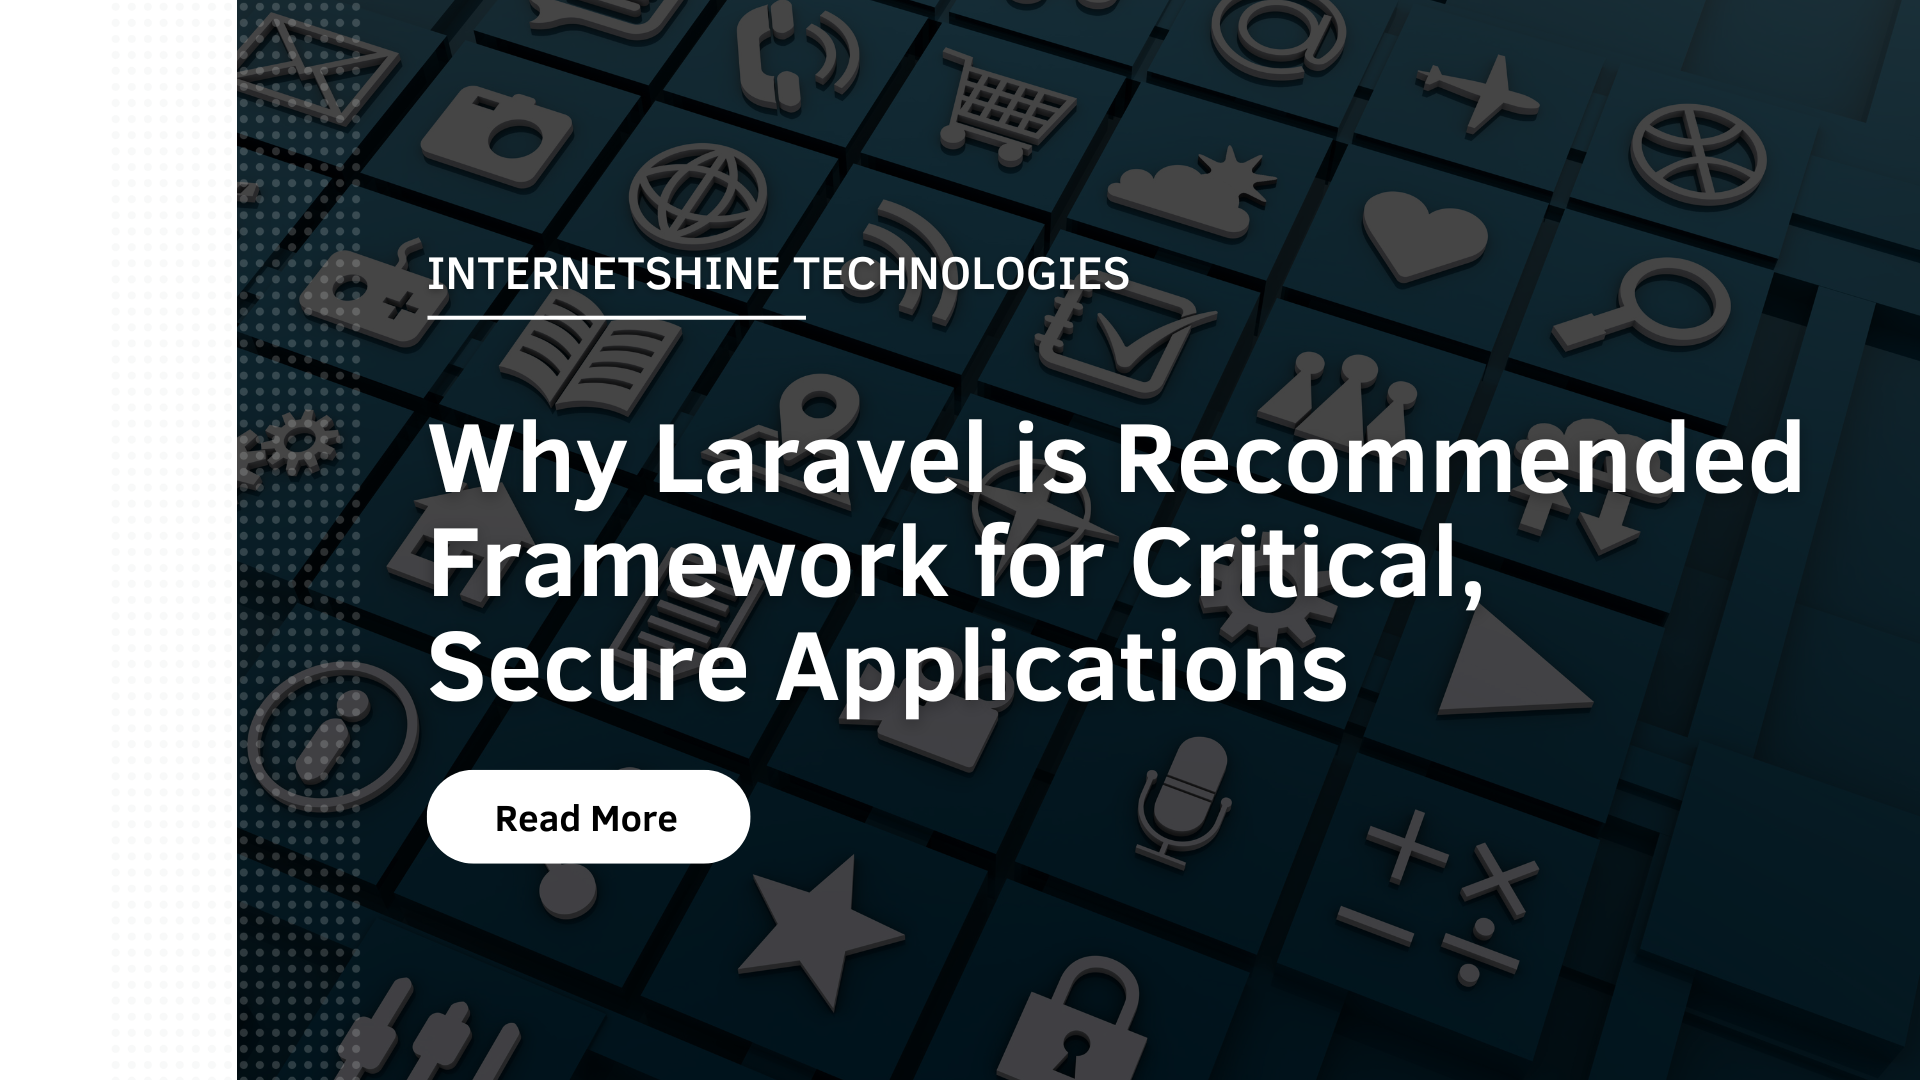 Why Laravel is Recommended Framework for Critical, Secure Applications